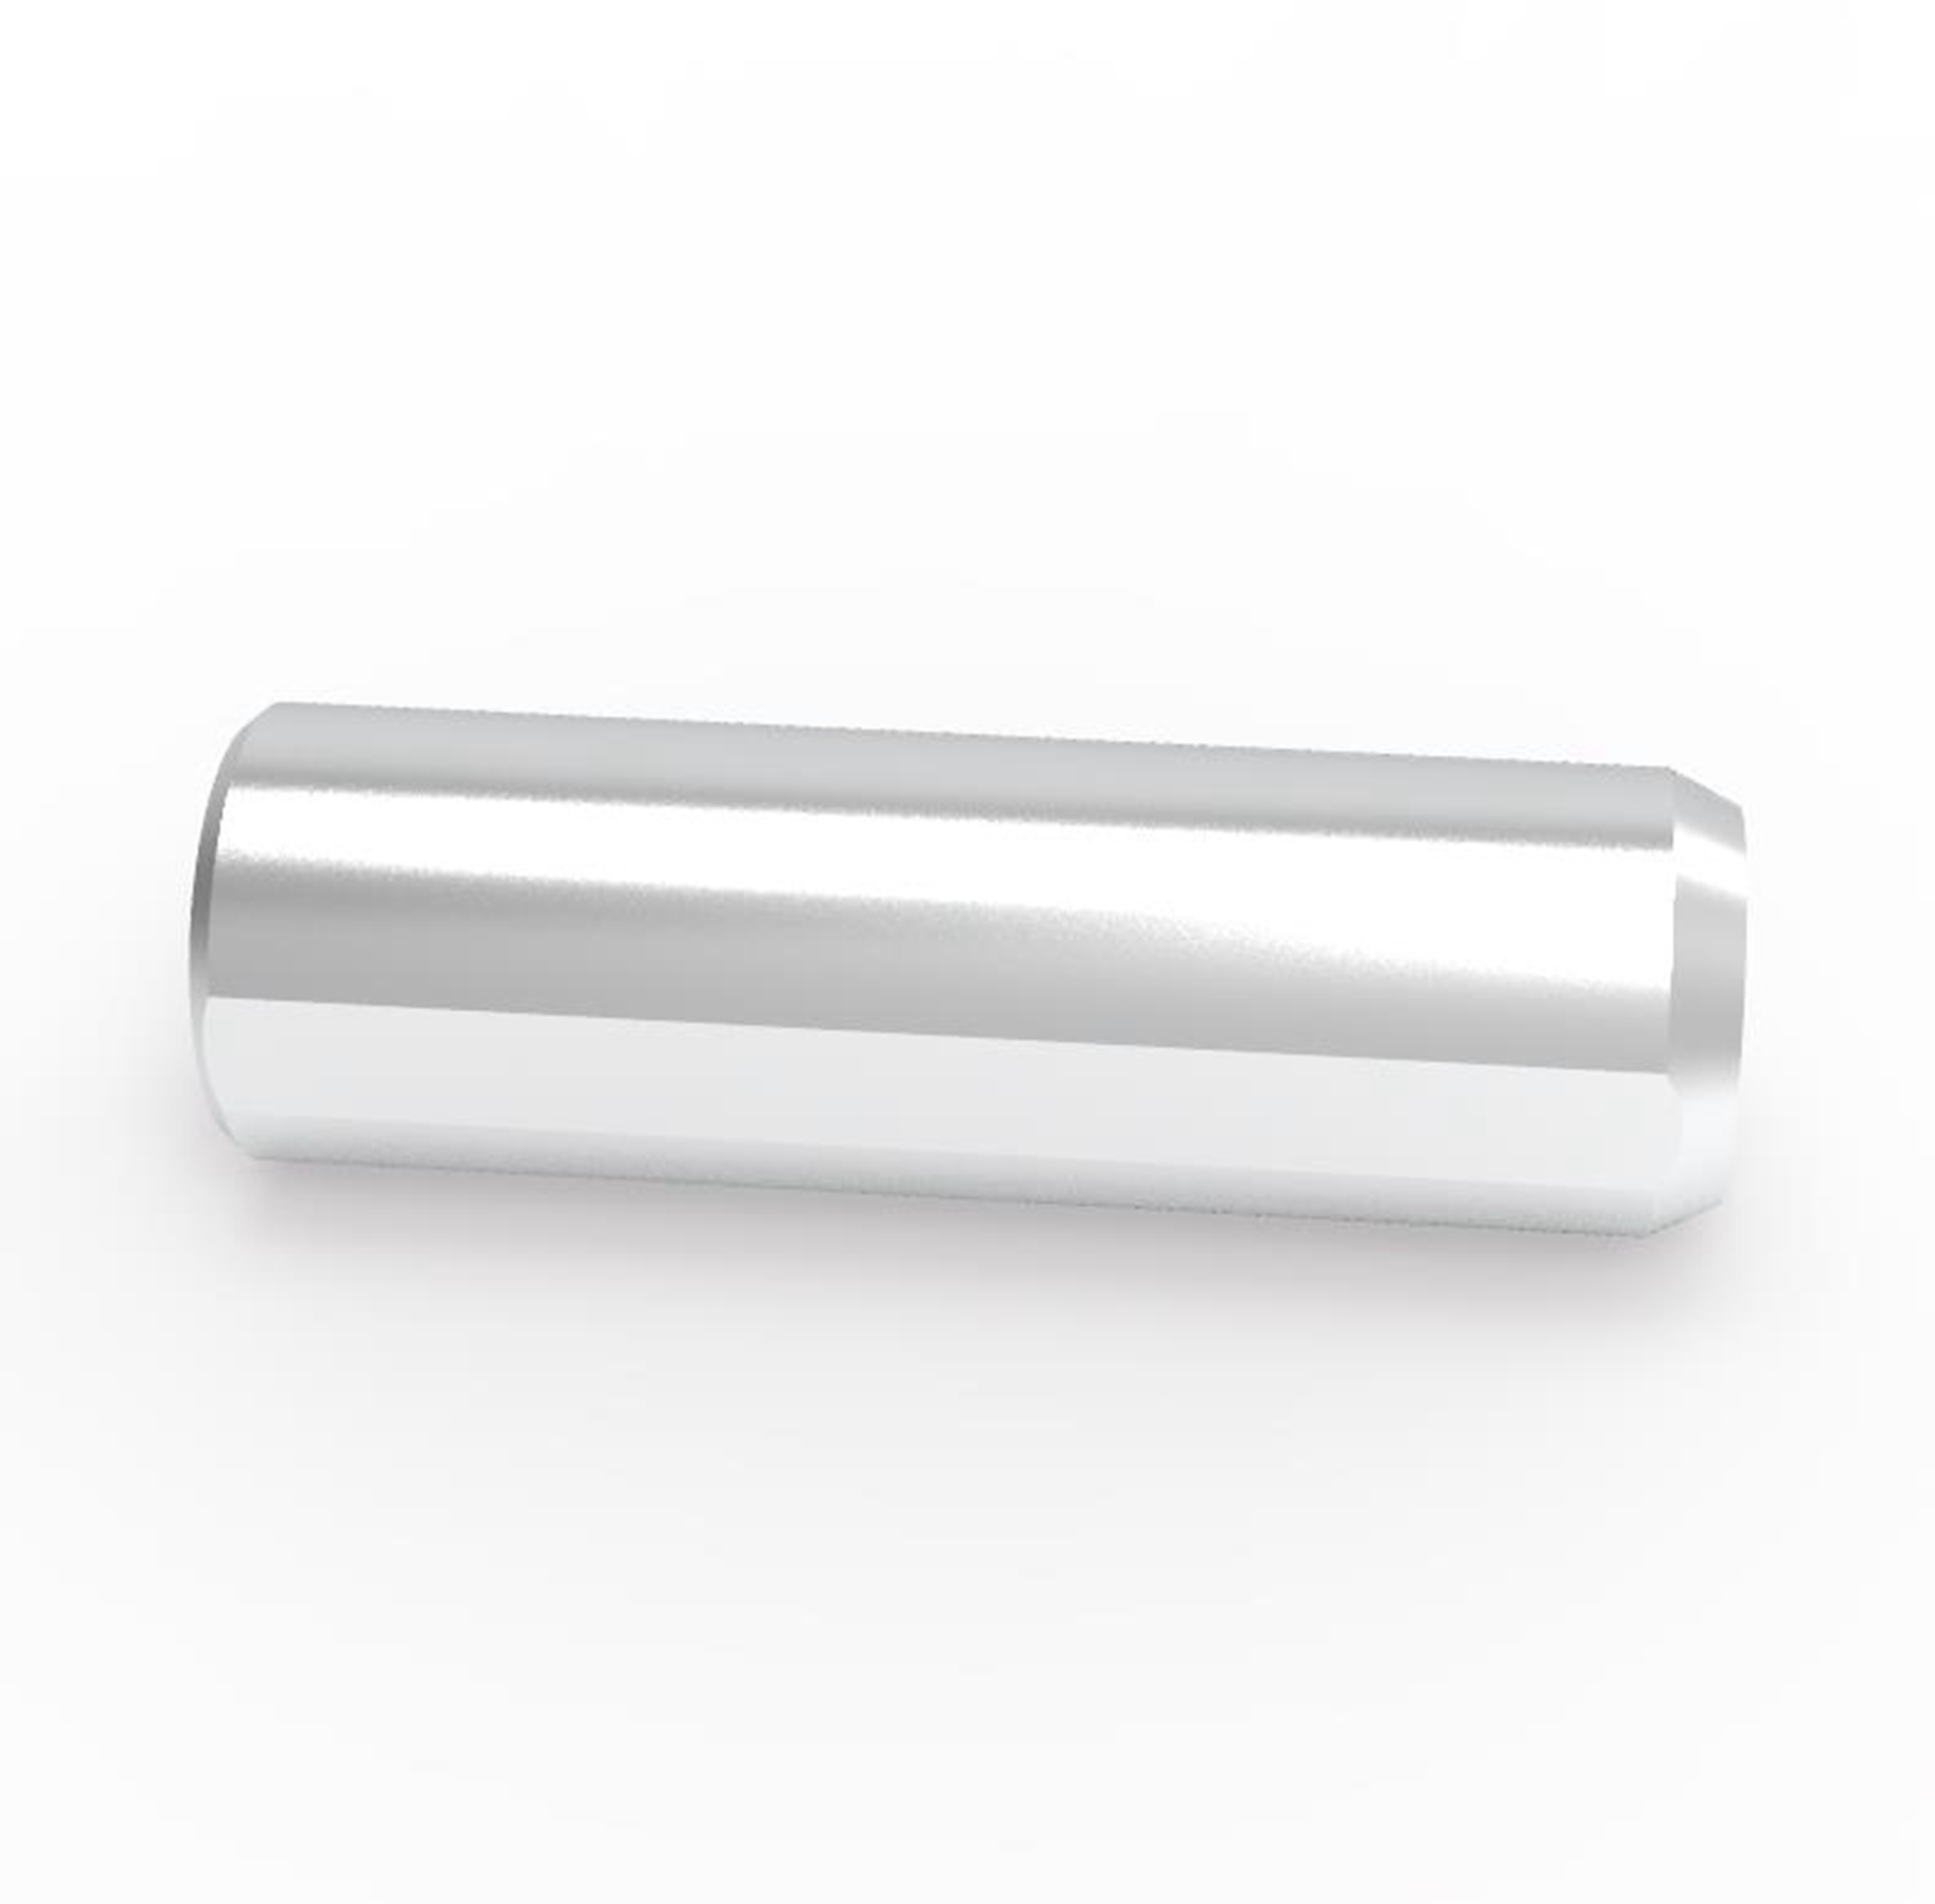 Details about   Pull Out Dowel Pin-Inch IMPERIAL 1/4 X 1/2 to 3/4 X 4" Plain Alloy Steel 10PK 